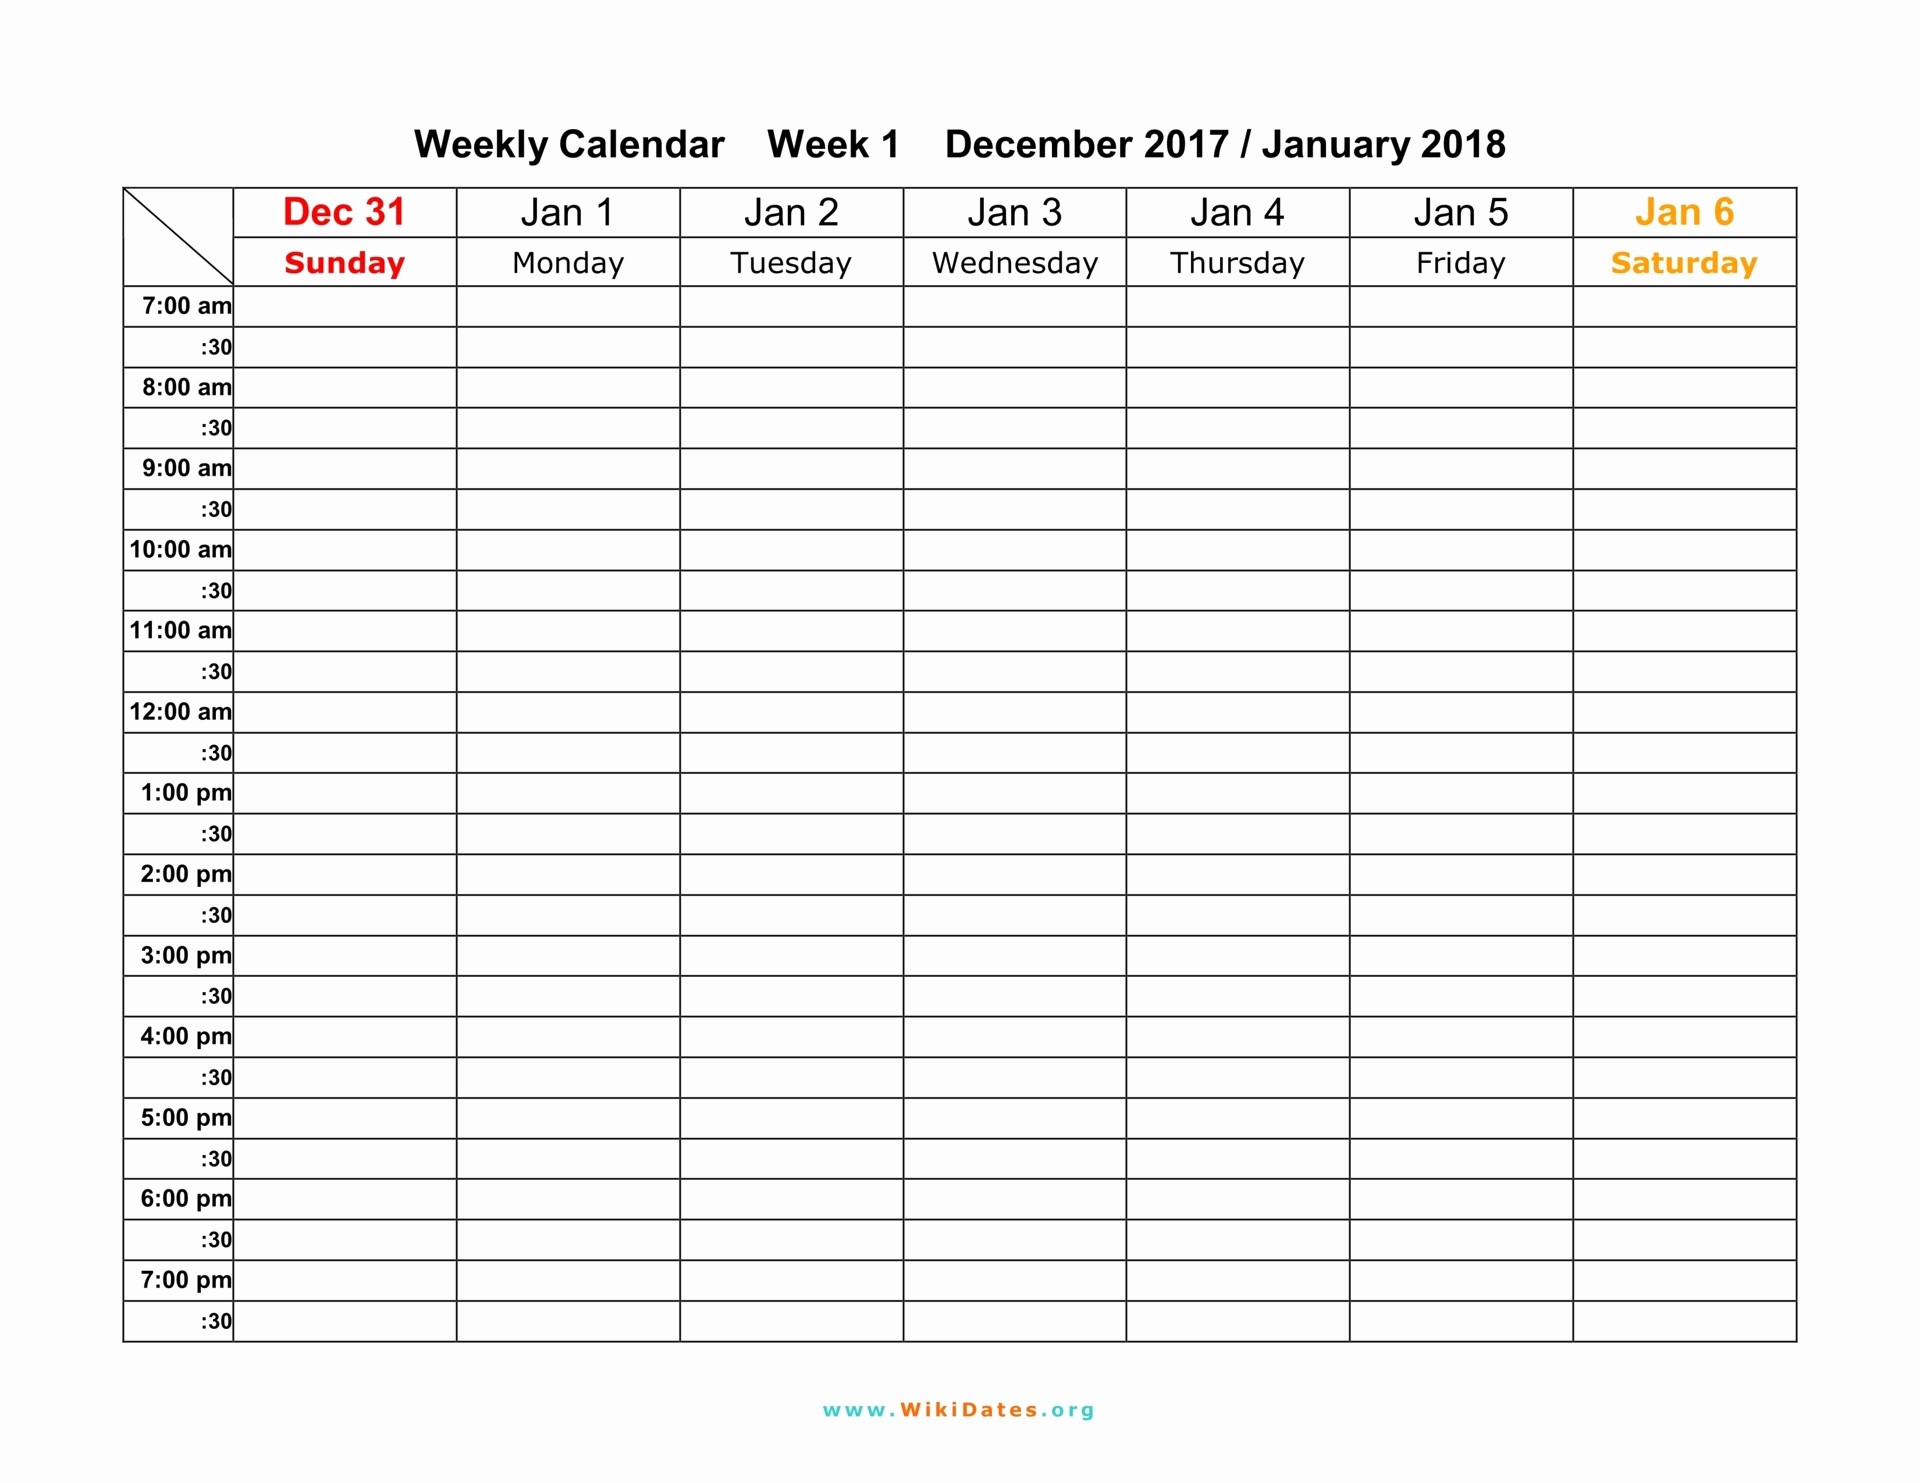 Printable Weekly Calendars with Times Awesome Weekly Calendar Download Weekly Calendar 2017 and 2018